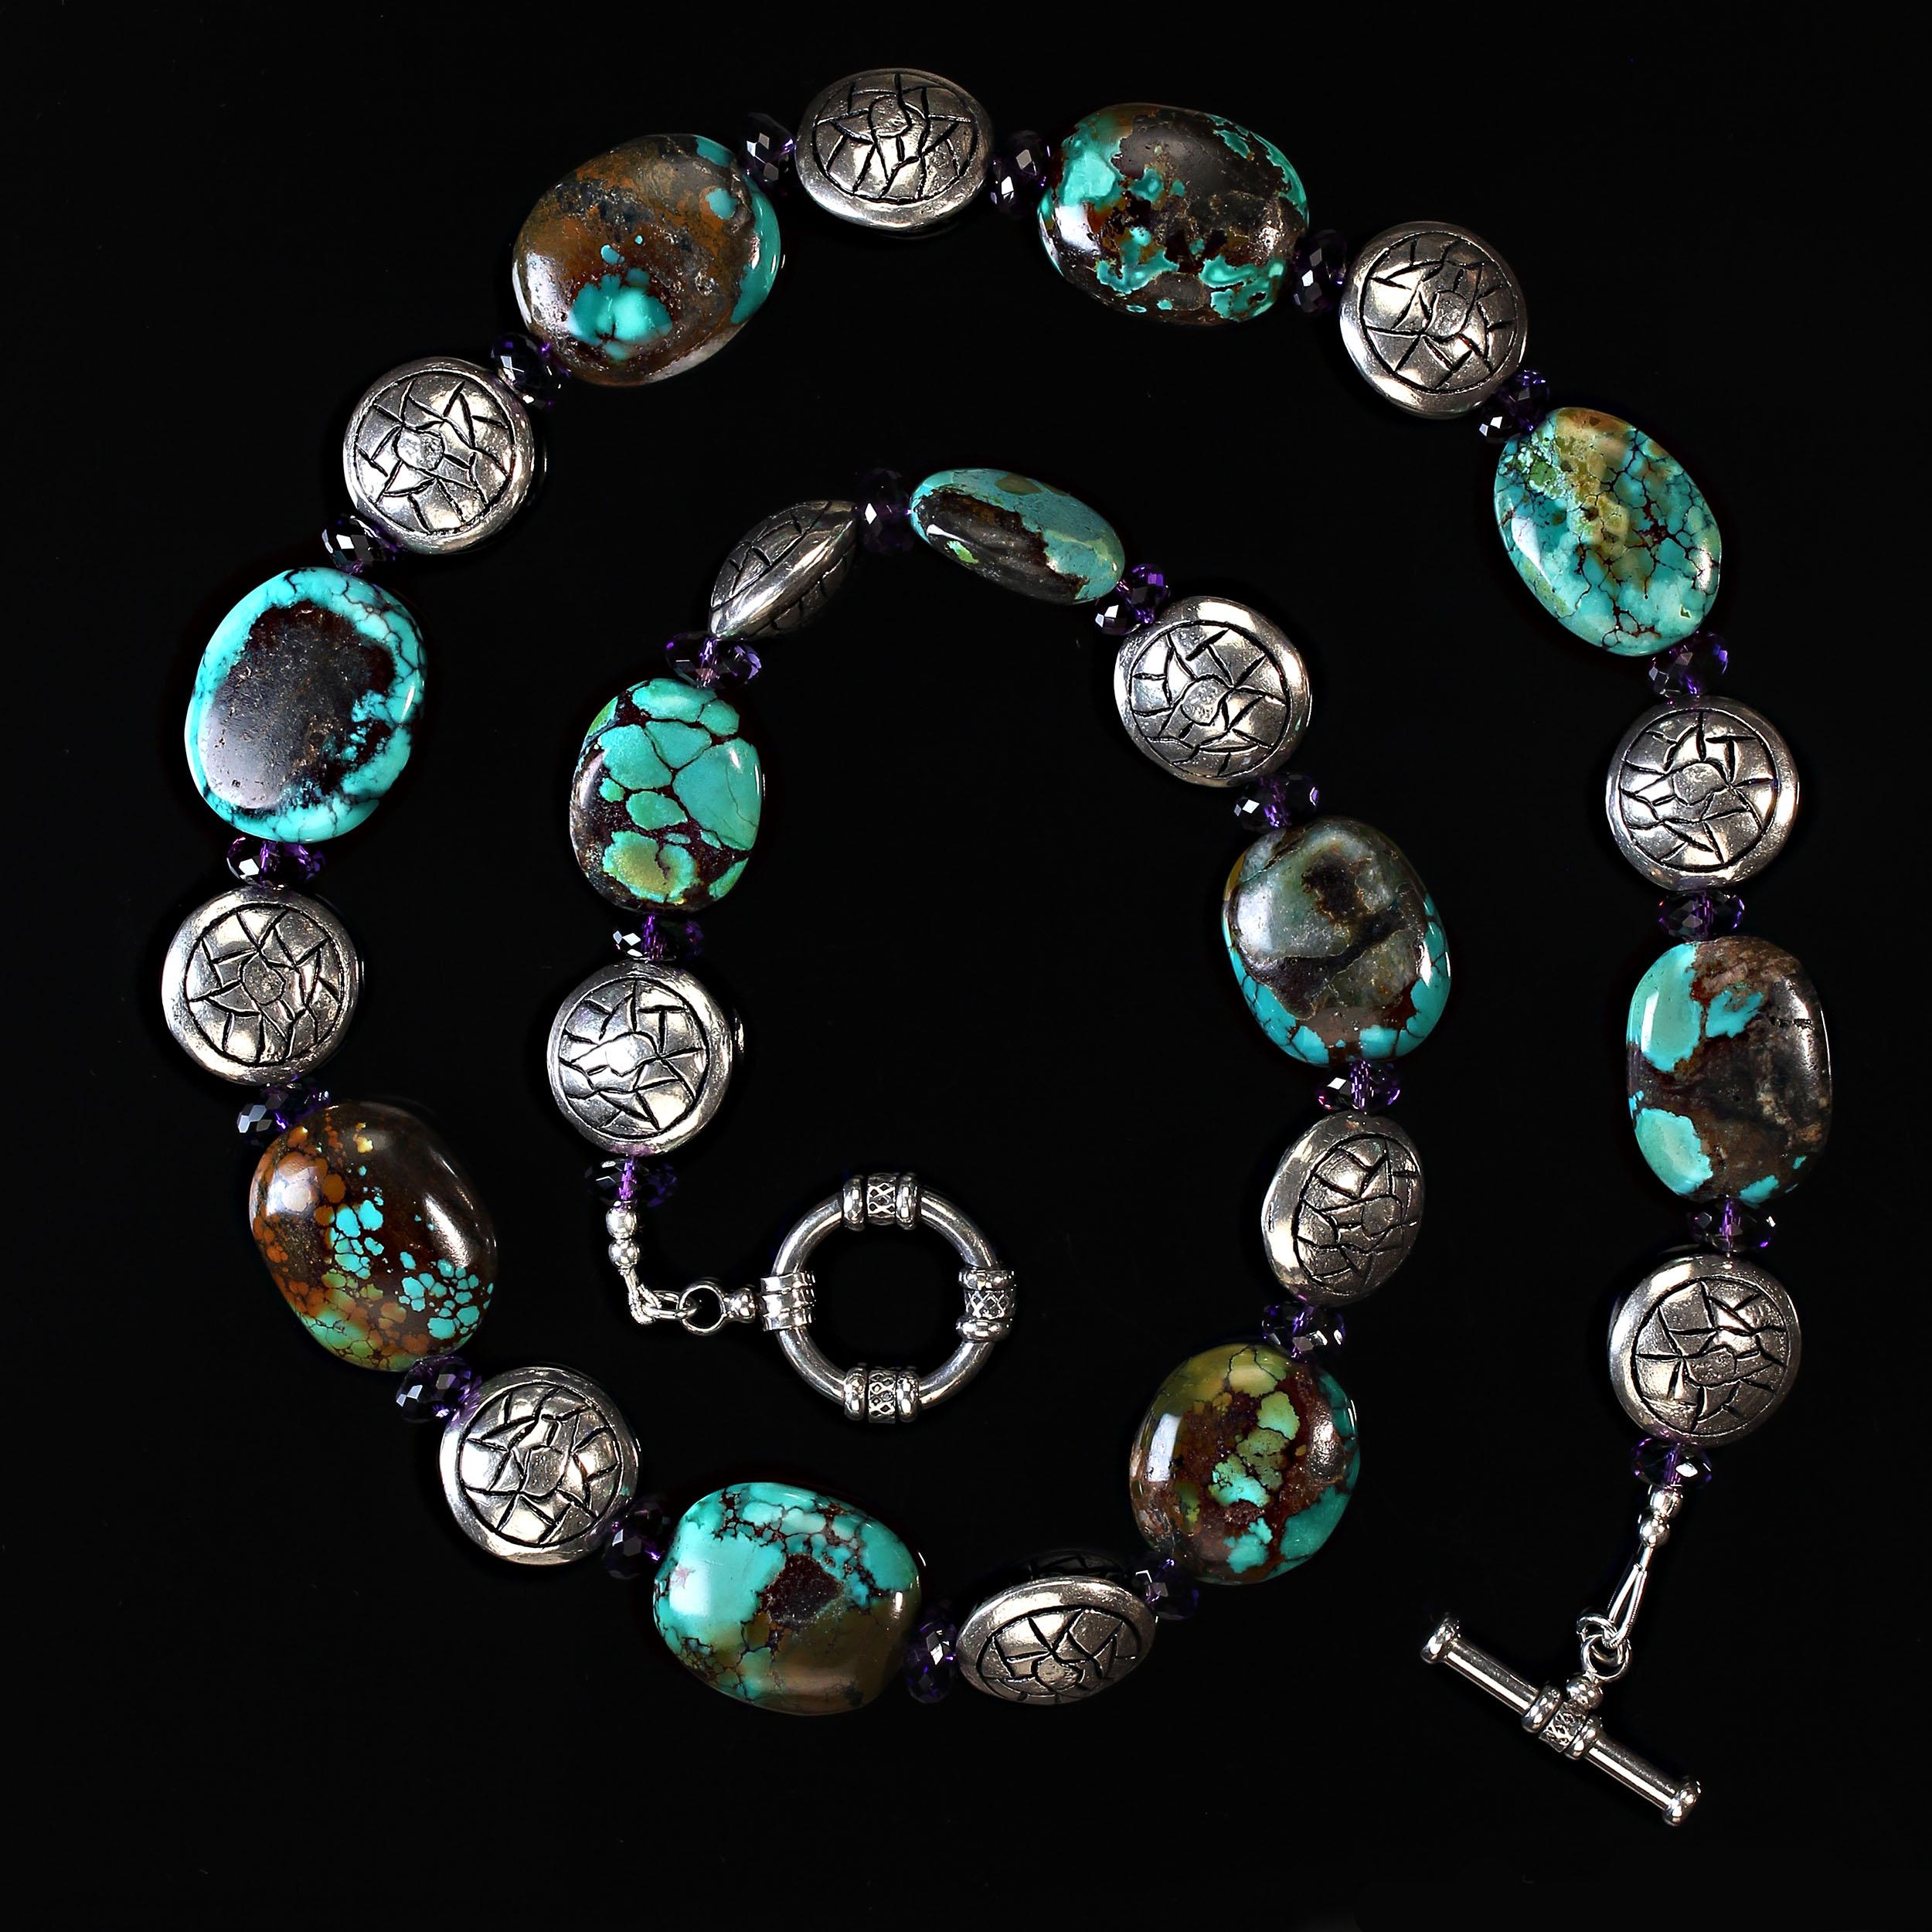 26 Inch necklace that features Hubei turquoise, sparkling amethyst rondelles, and distinctive silver tone etched discs.  This lovely necklace is secured with a large silver toggle clasp. MN2341